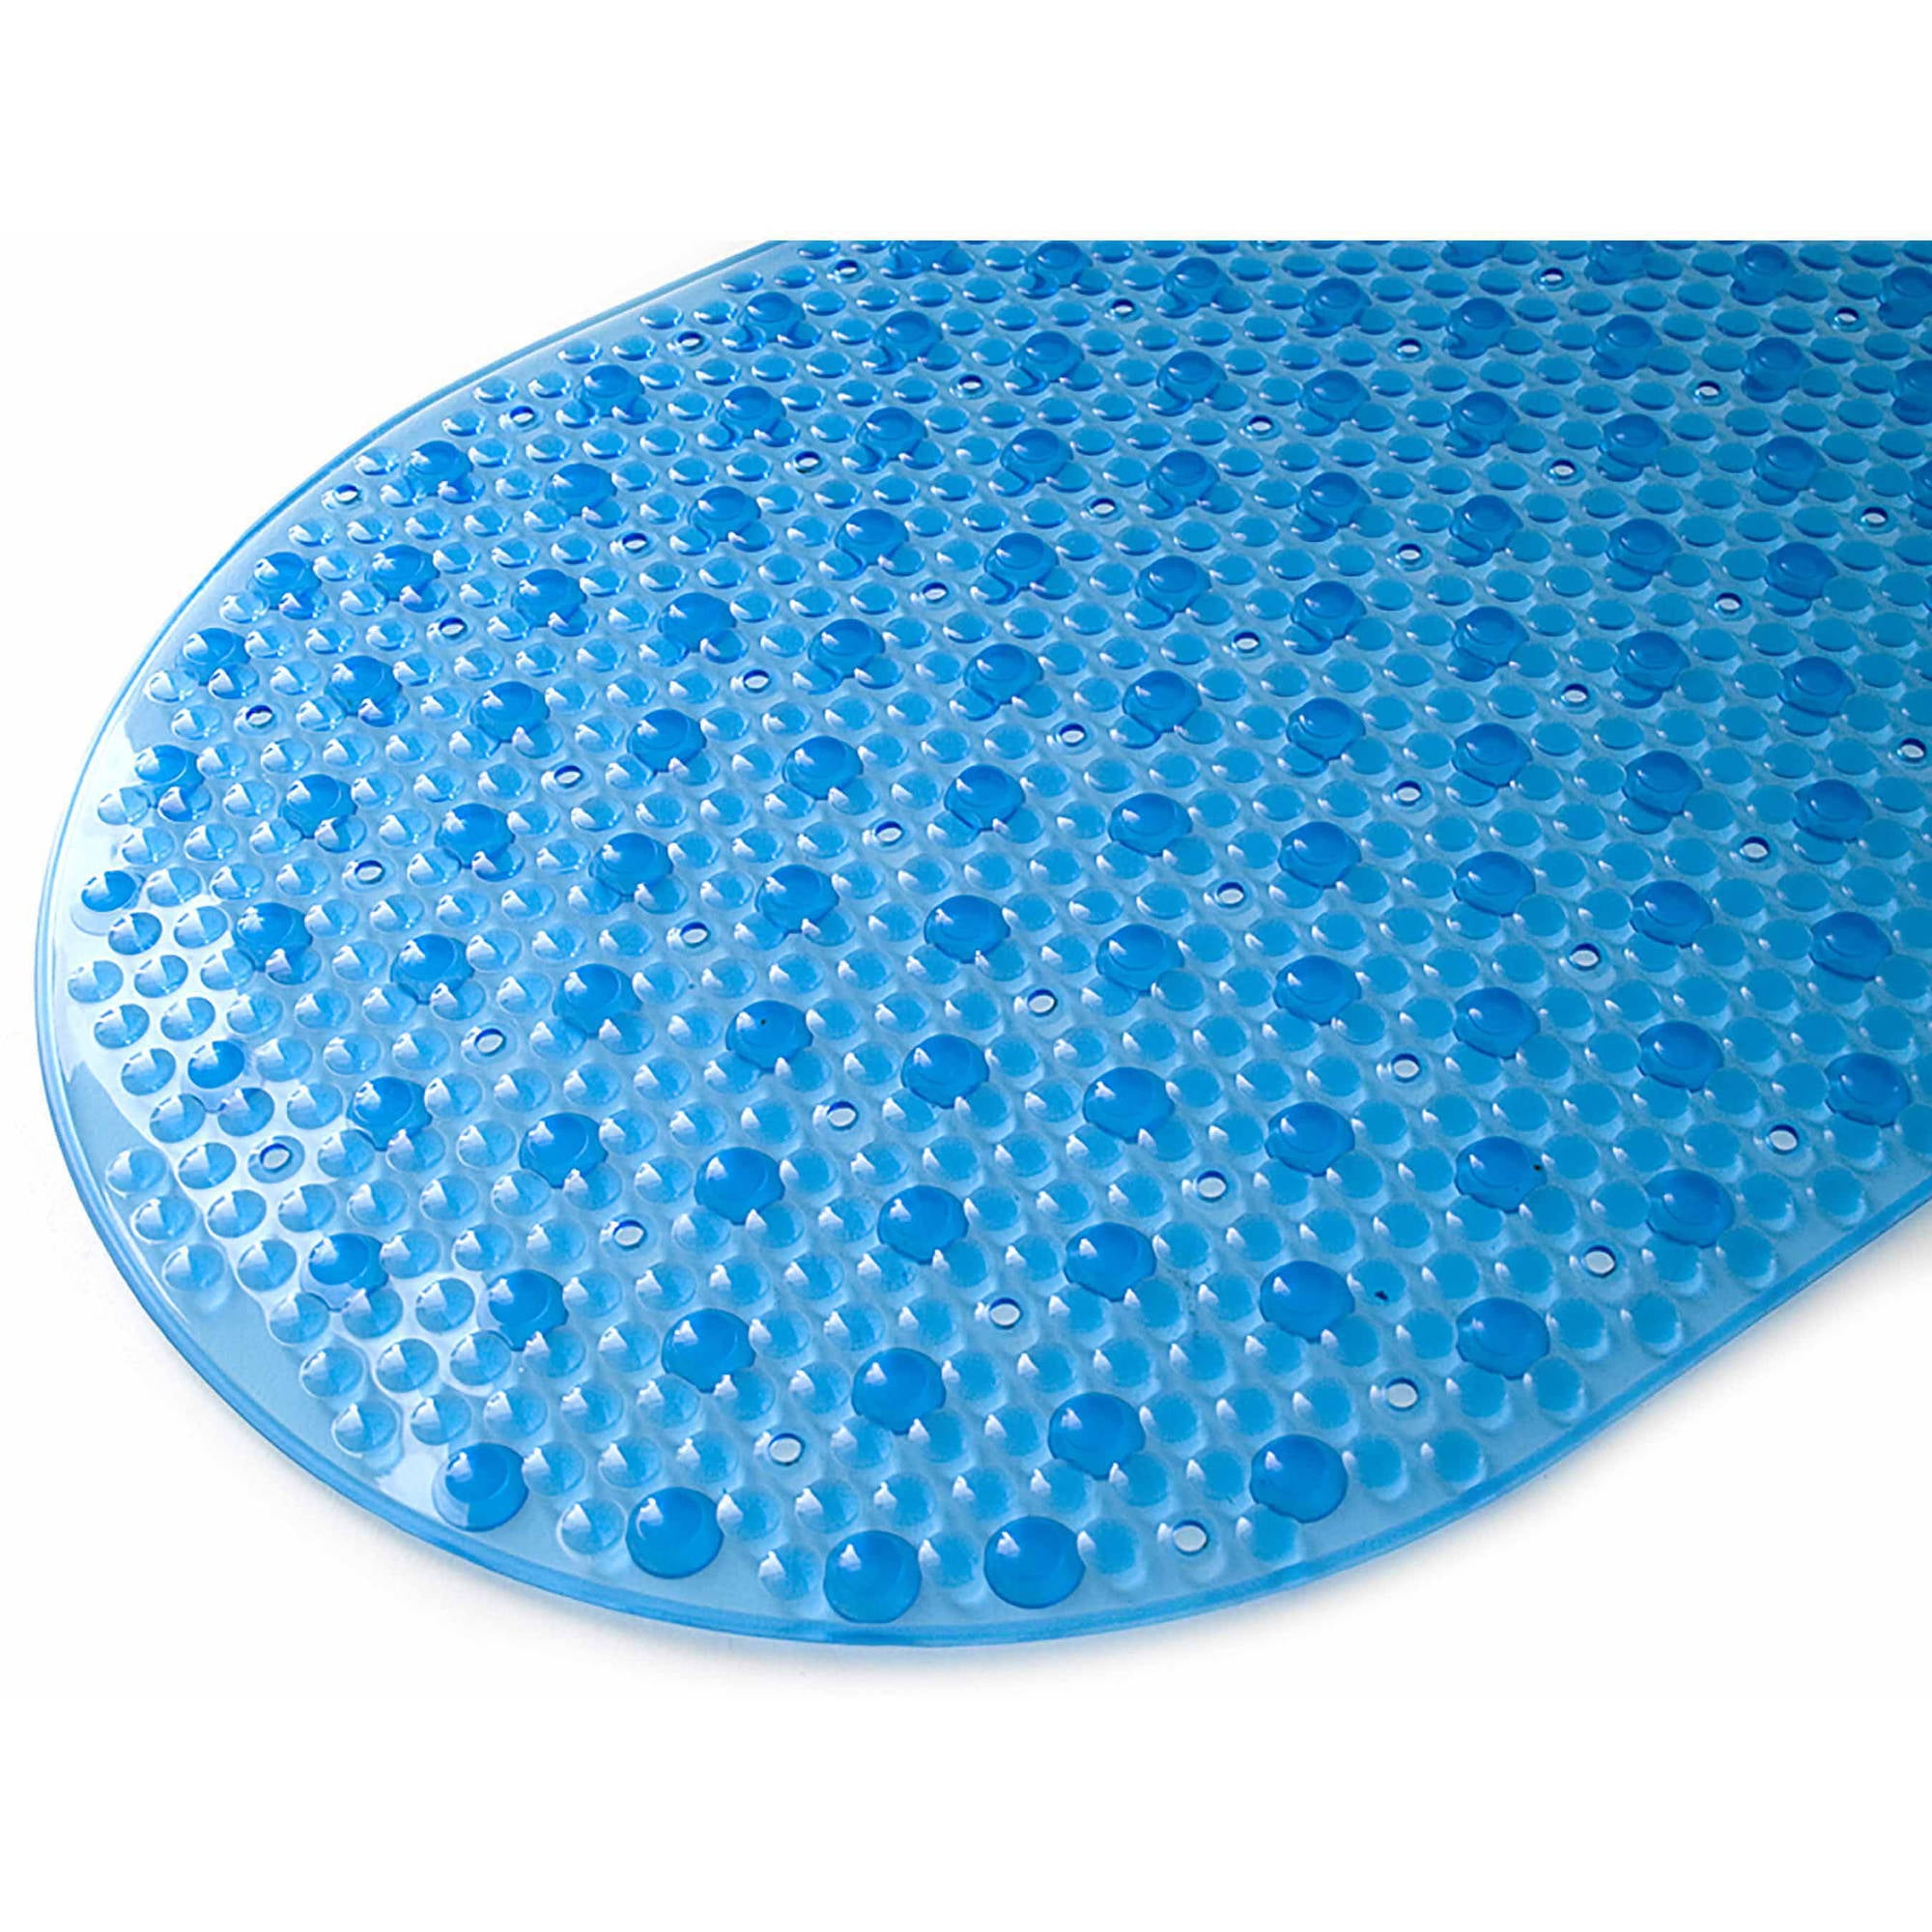 Non Slip Shower Mat with 145 Suction Cups - 21.7x21.7in (55x55cm) - Mildew  Resistant - Anti-Slip Rubber Bath Mat for Inside Shower or Tub with  Draining Holes 